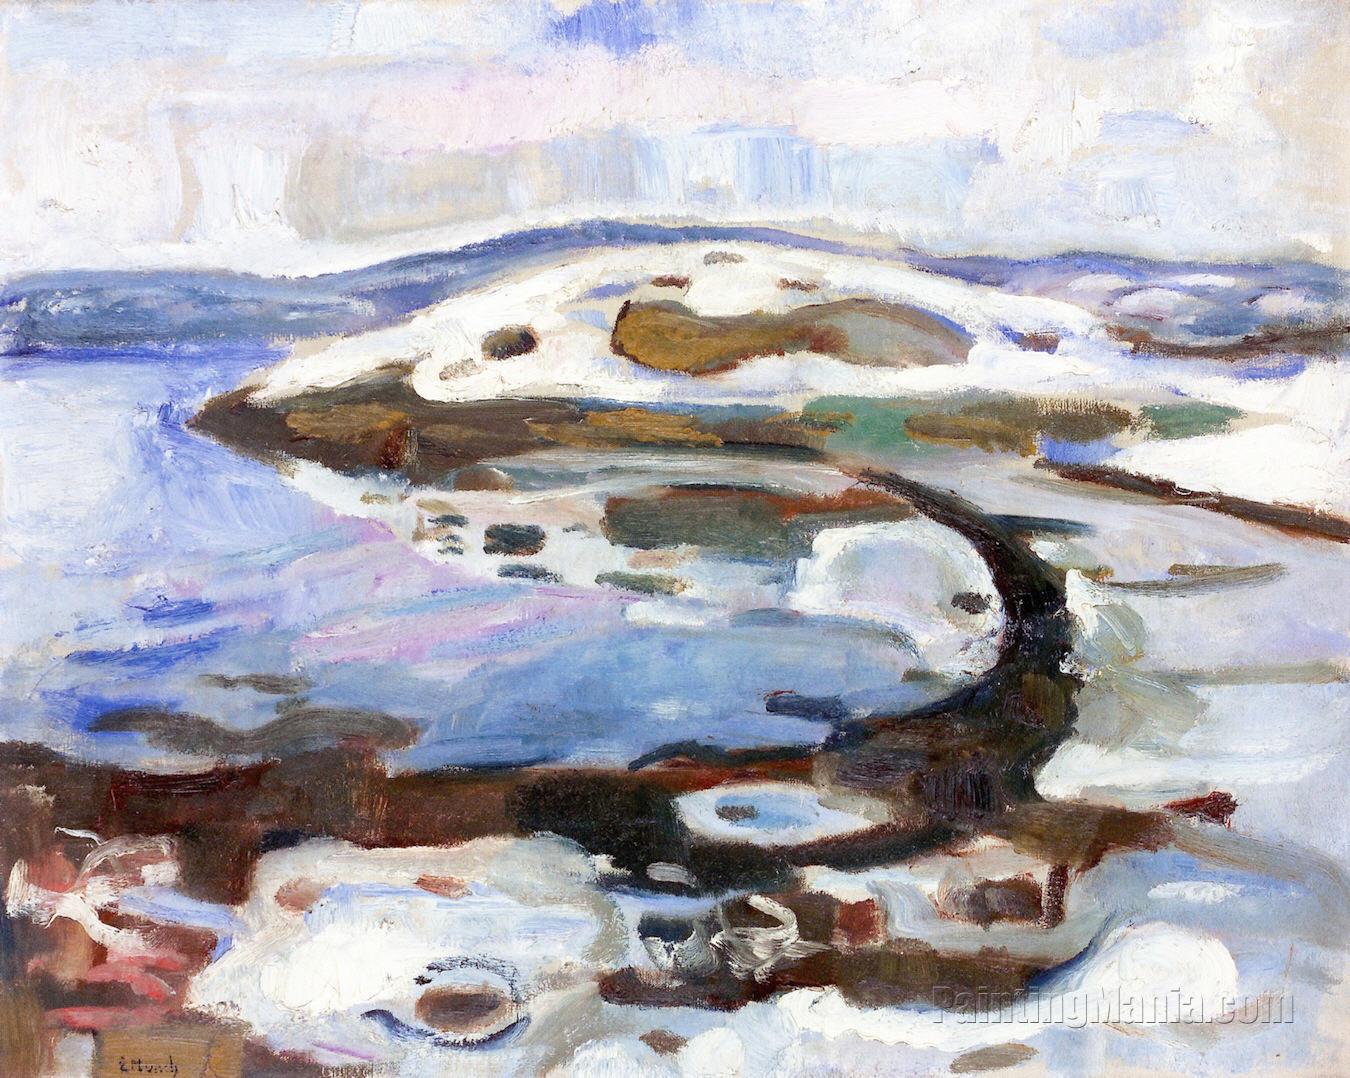 Bay by the Fjord in Winter